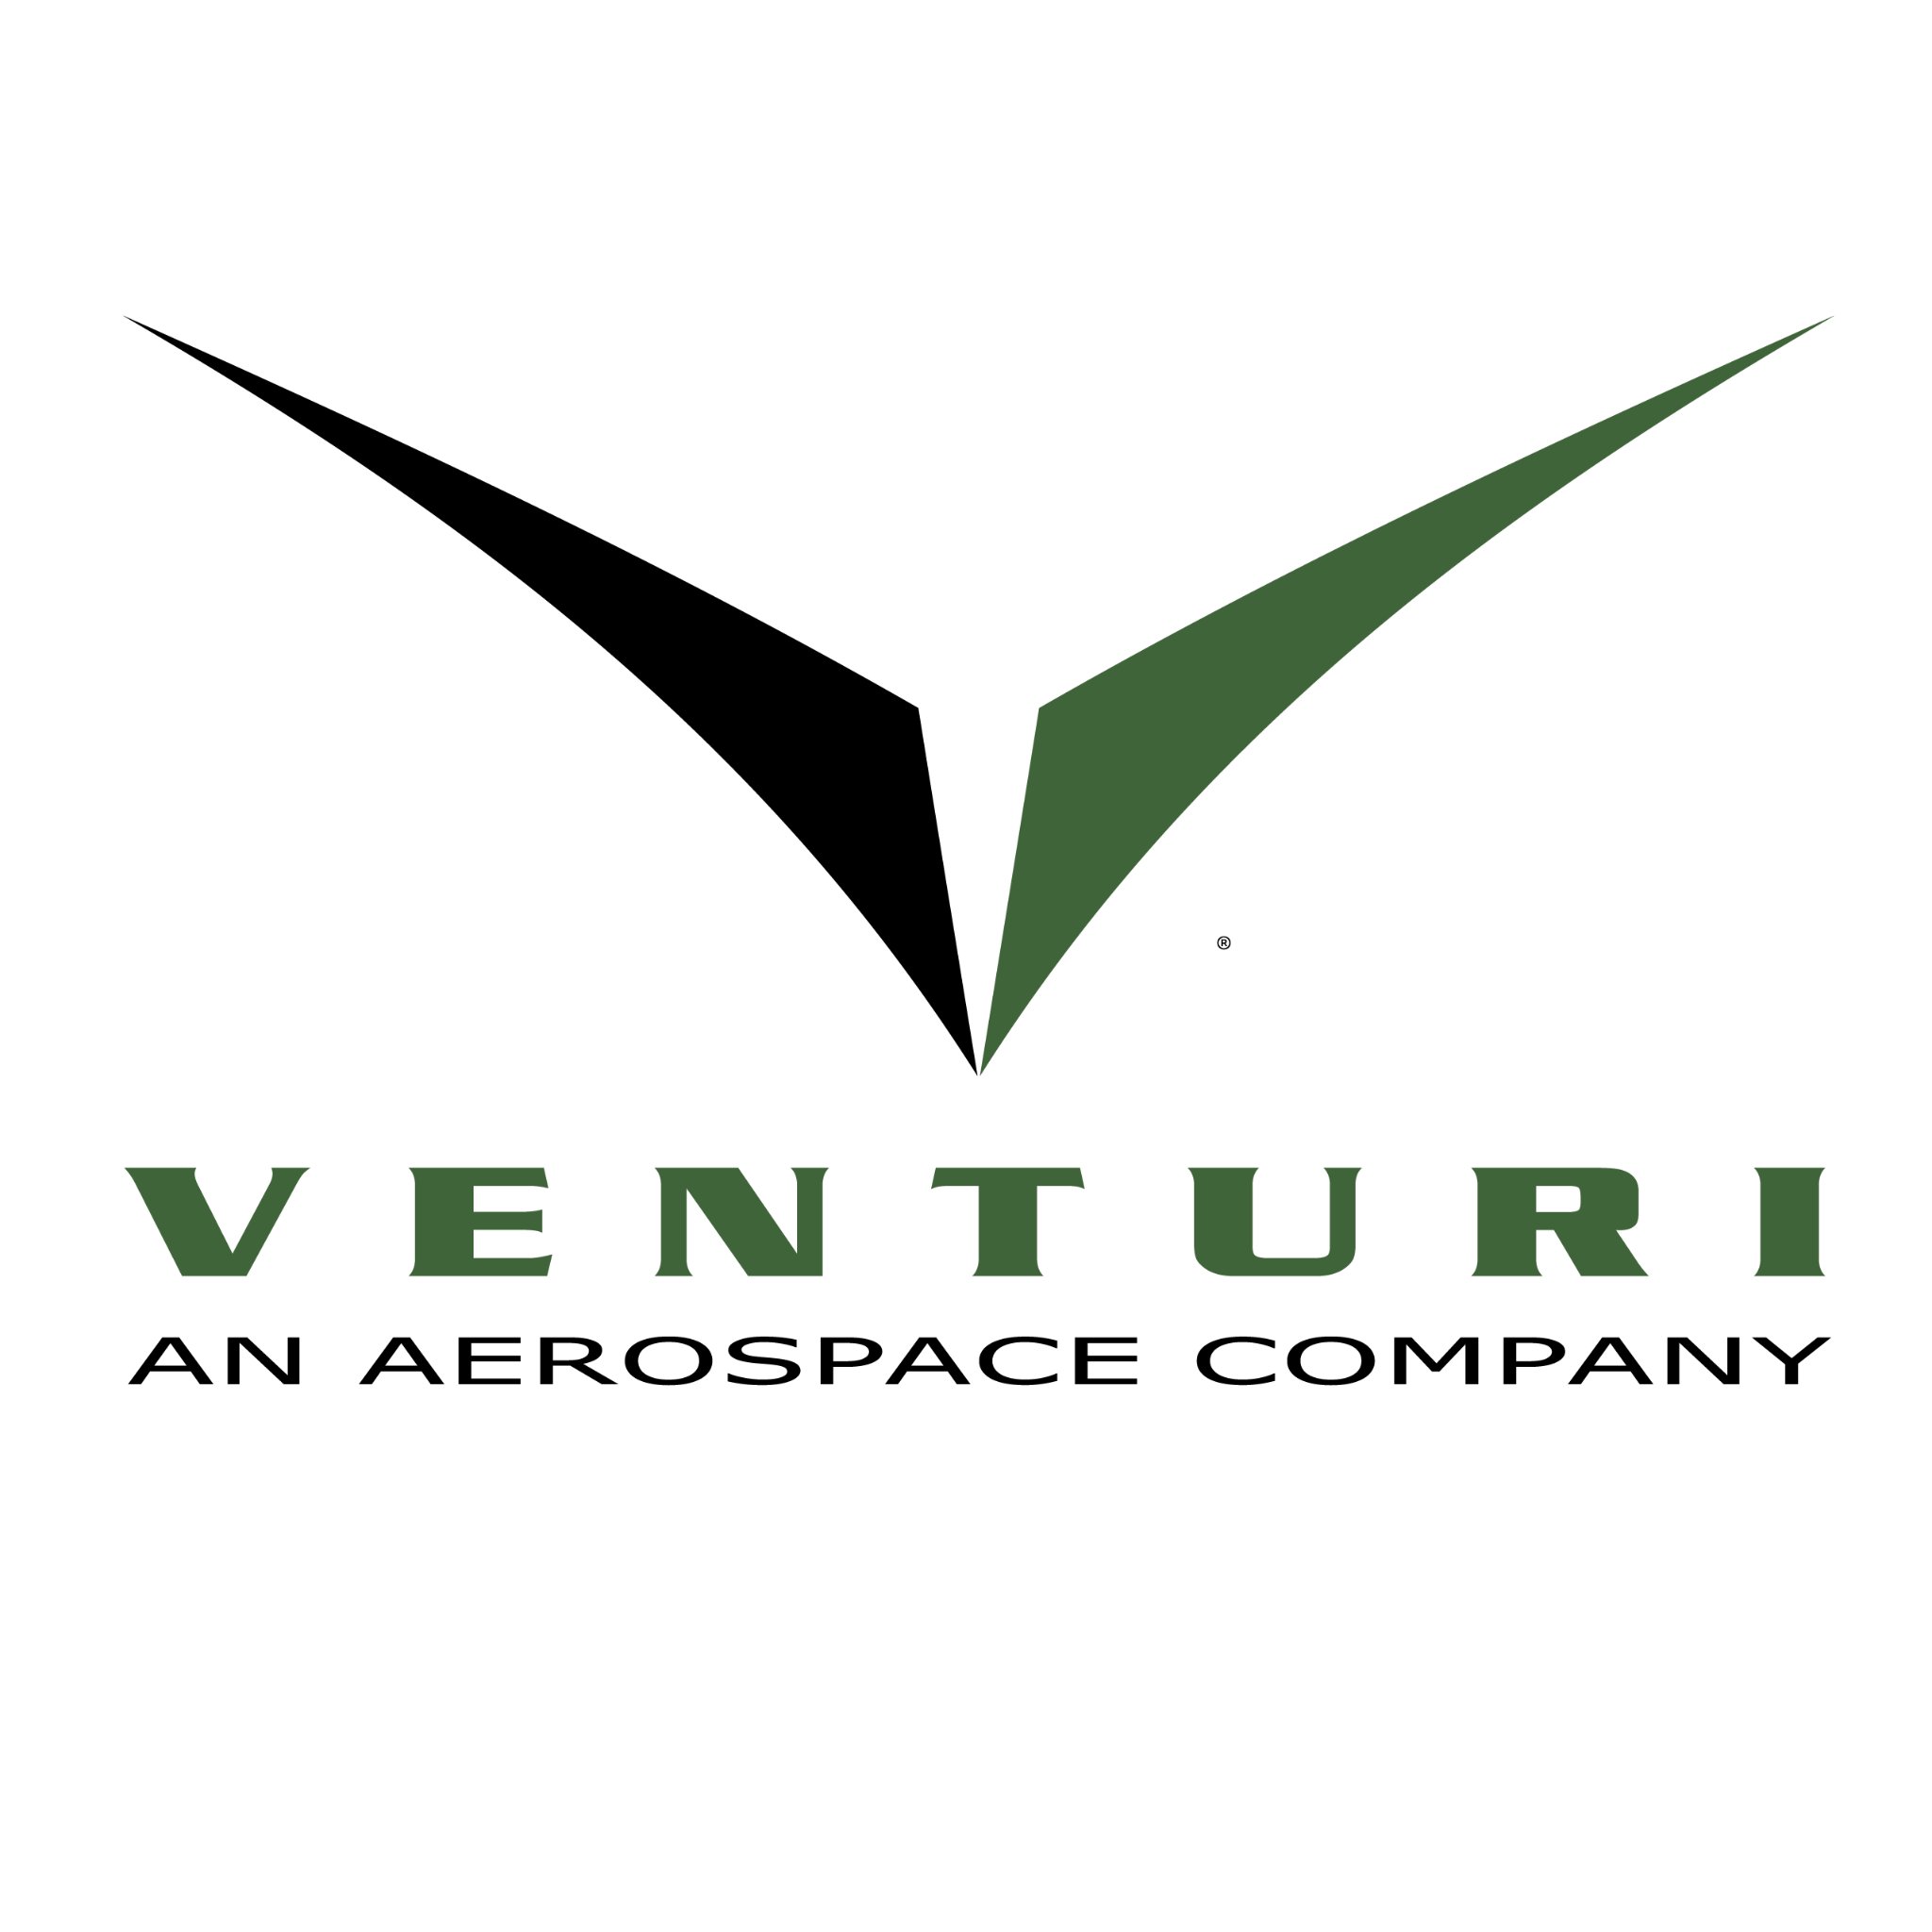 Venturi, Inc. is committed to delivering excellent technical support services to the U.S. Government and our customers.